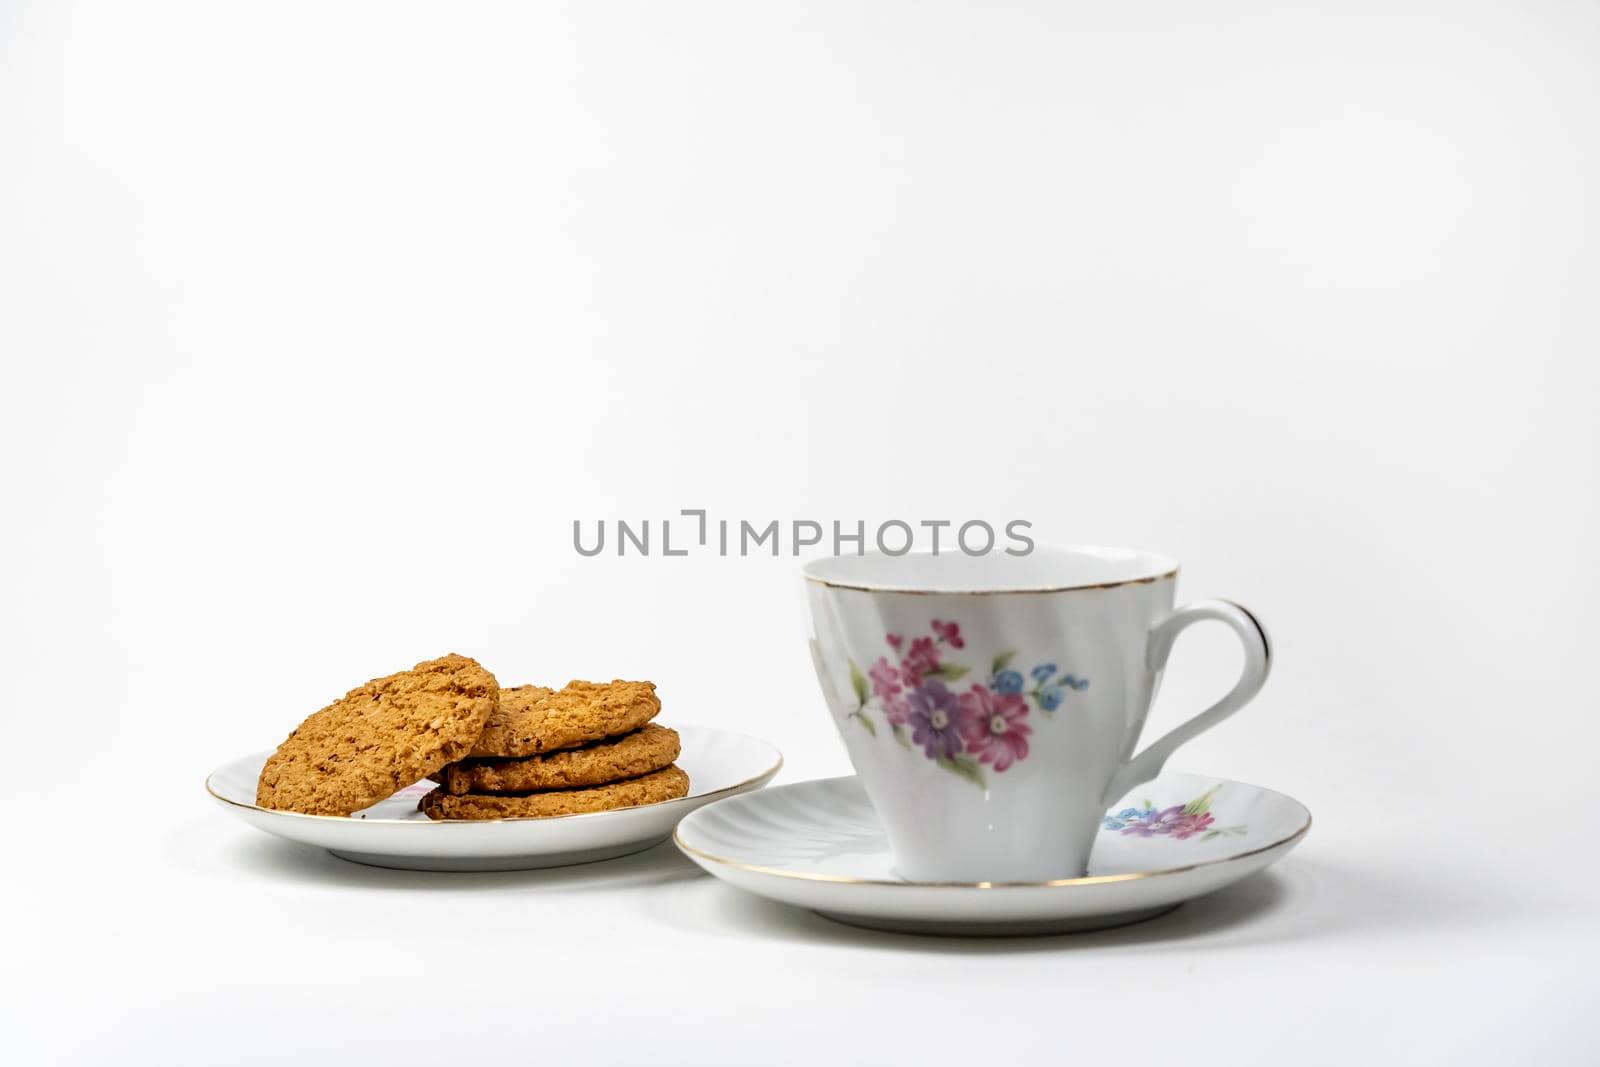 Homemade, sweet biscuits for tea.jpg by ben44